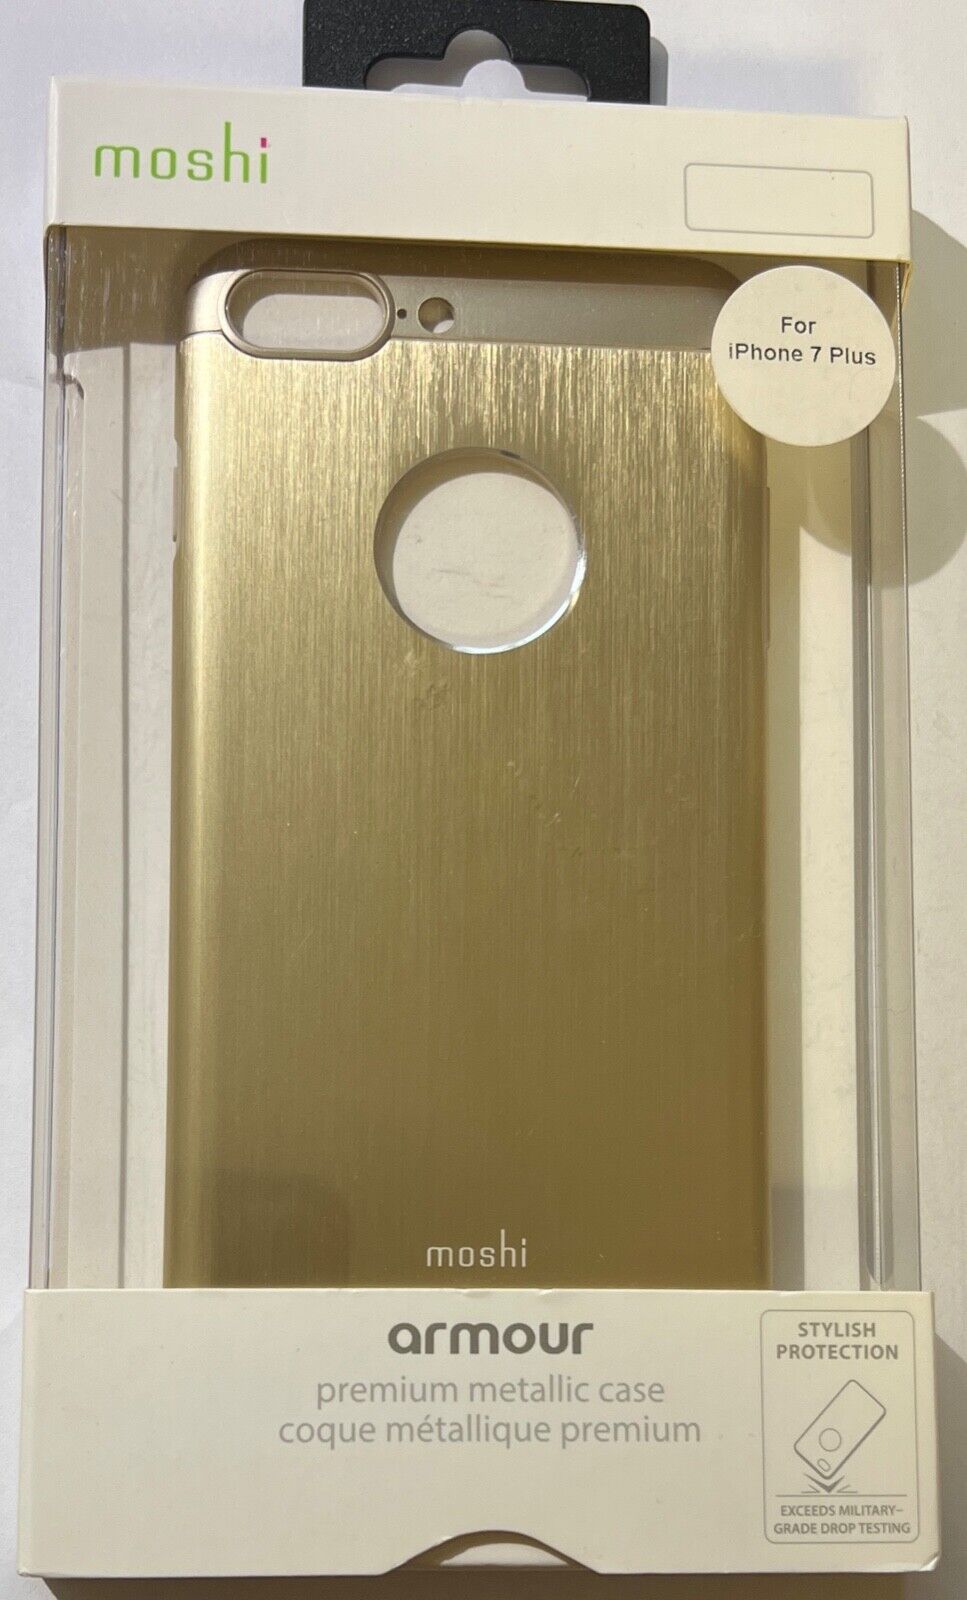 NEW Moshi Armour Premium Metallic Case for iPhone 7 Plus (5.5") ONLY - Gold